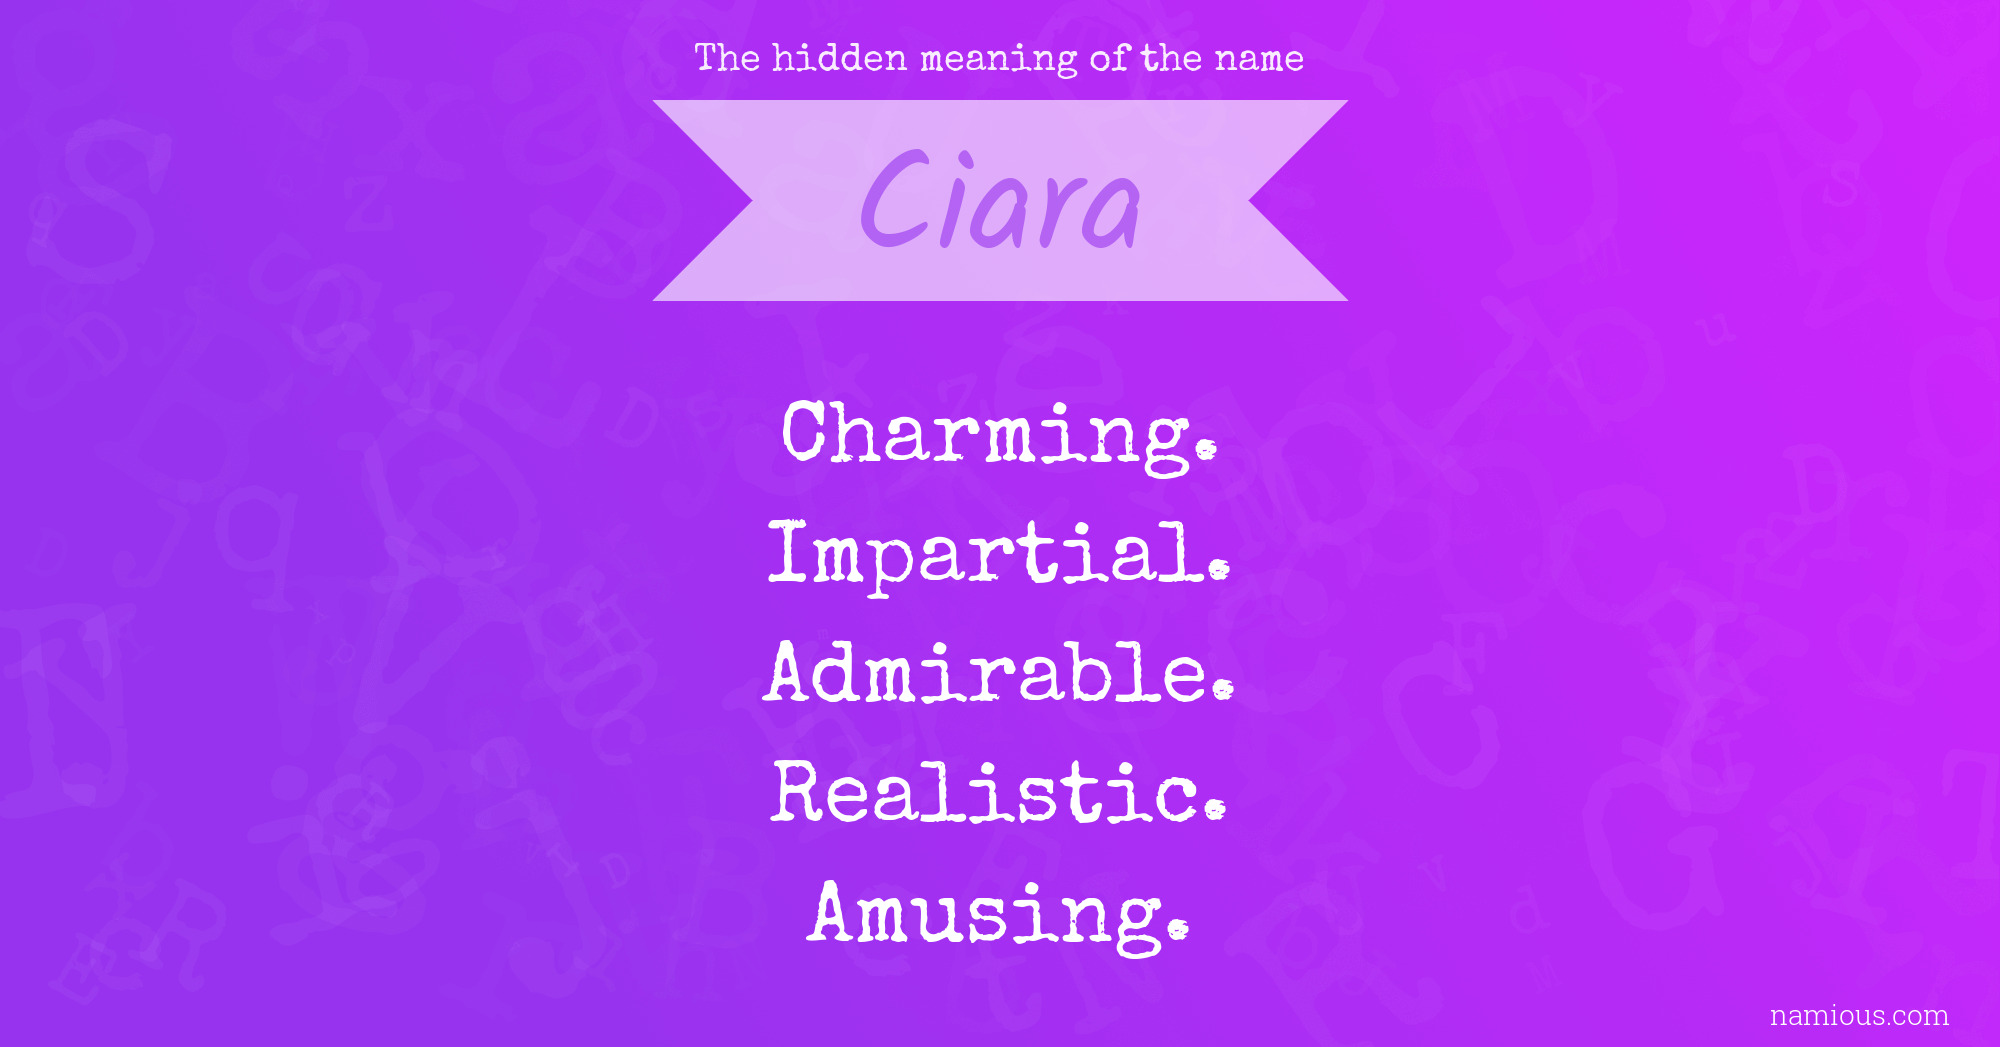 The hidden meaning of the name Ciara